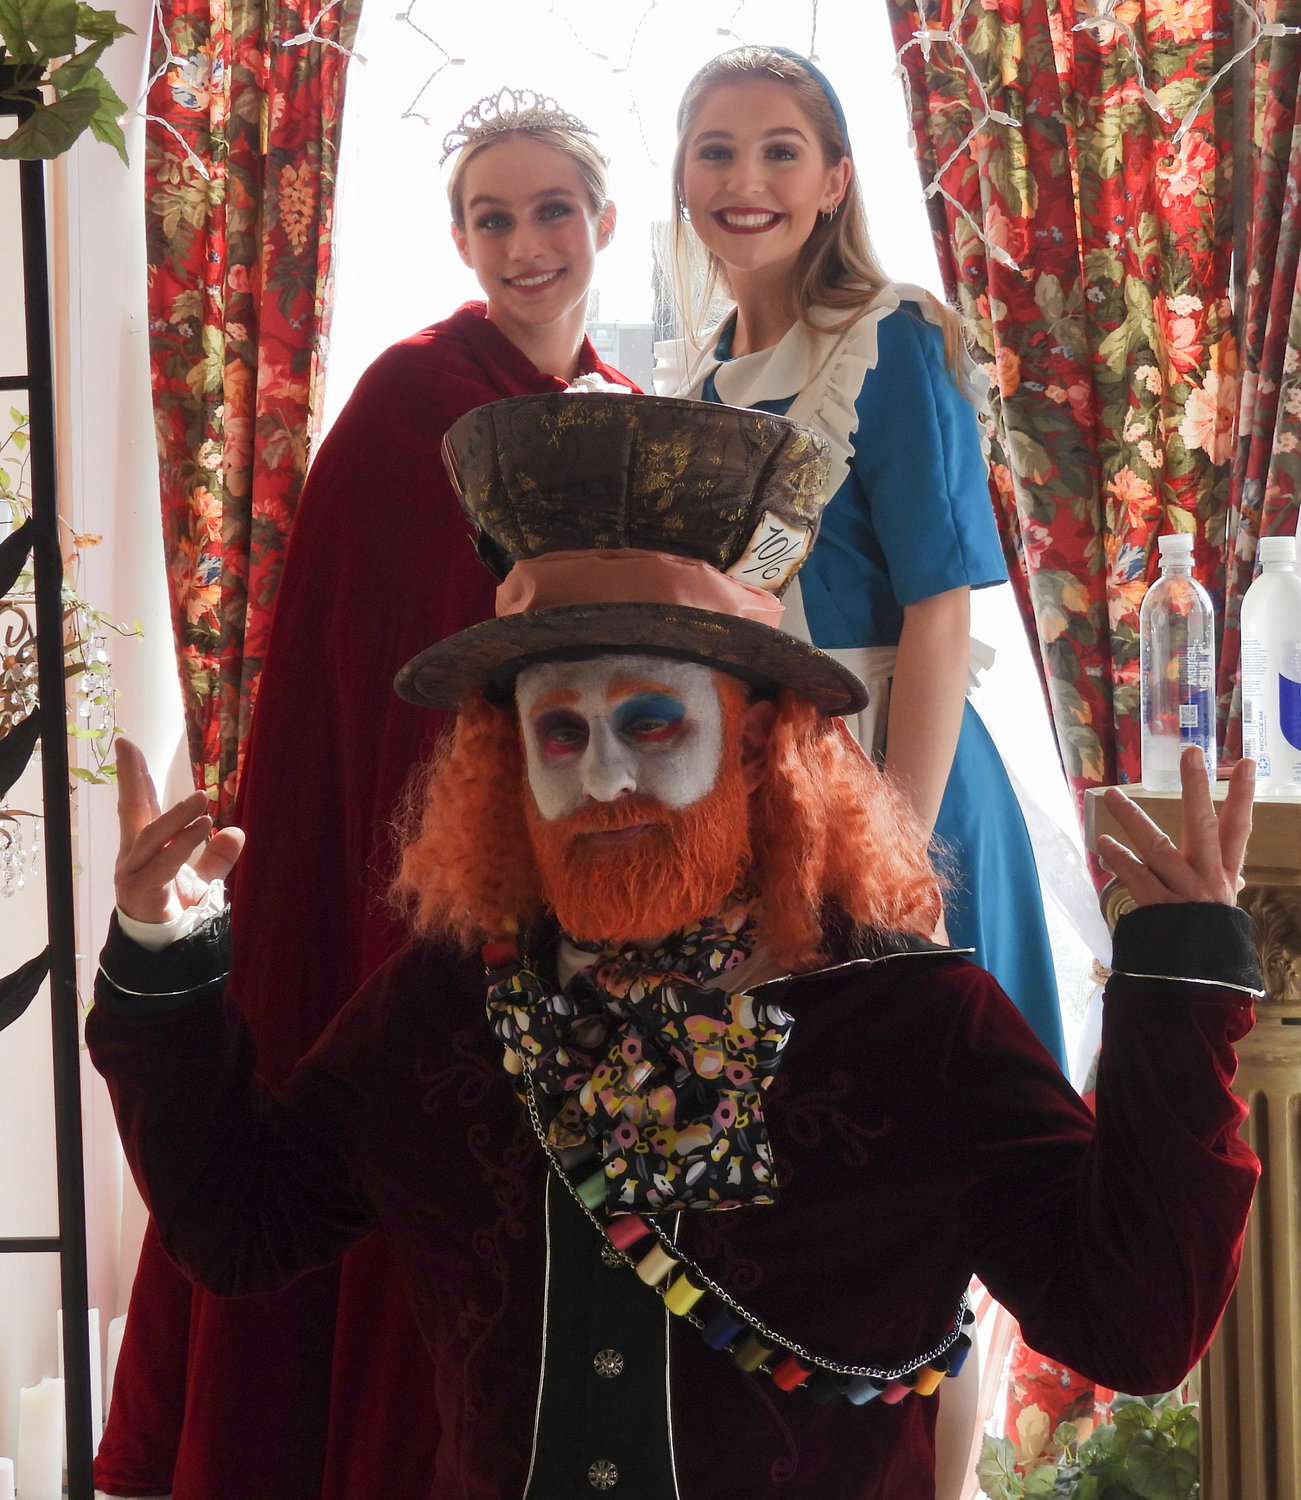 The Oneida Parks and Recreation Department's "Through the Looking Glass" event featured  members of the Bogardus Performing Art Center and the city taking the role of beloved characters of "Alice in Wonderland," with actors taking center stage in storefronts through the city.